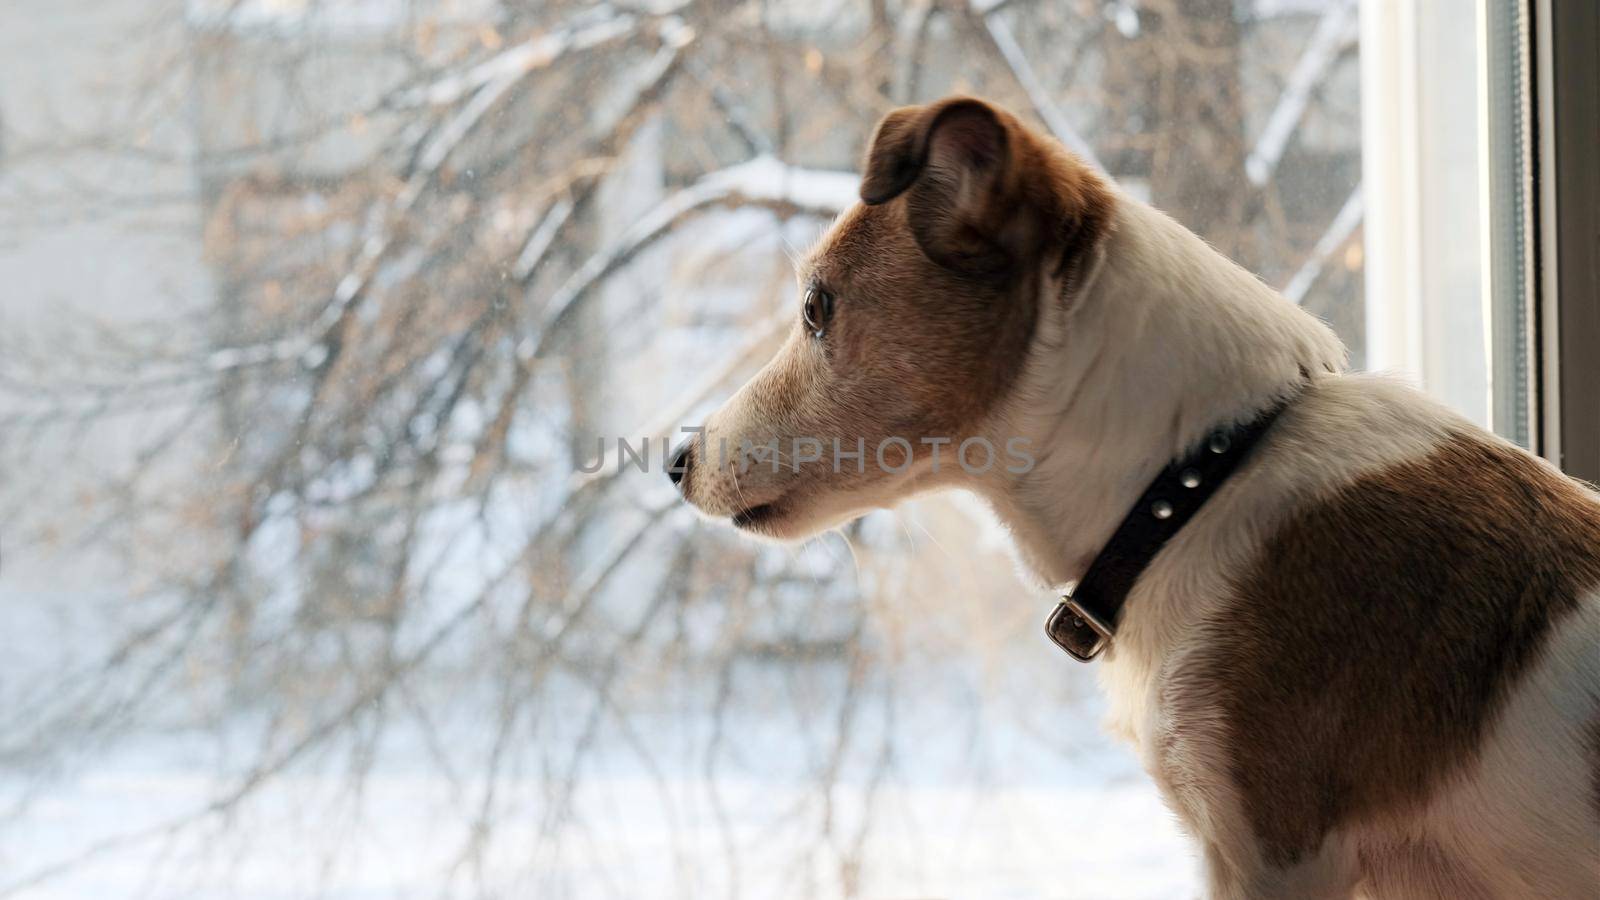 Dog jack srassell terrier looks out the window at falling snow in winter in the city